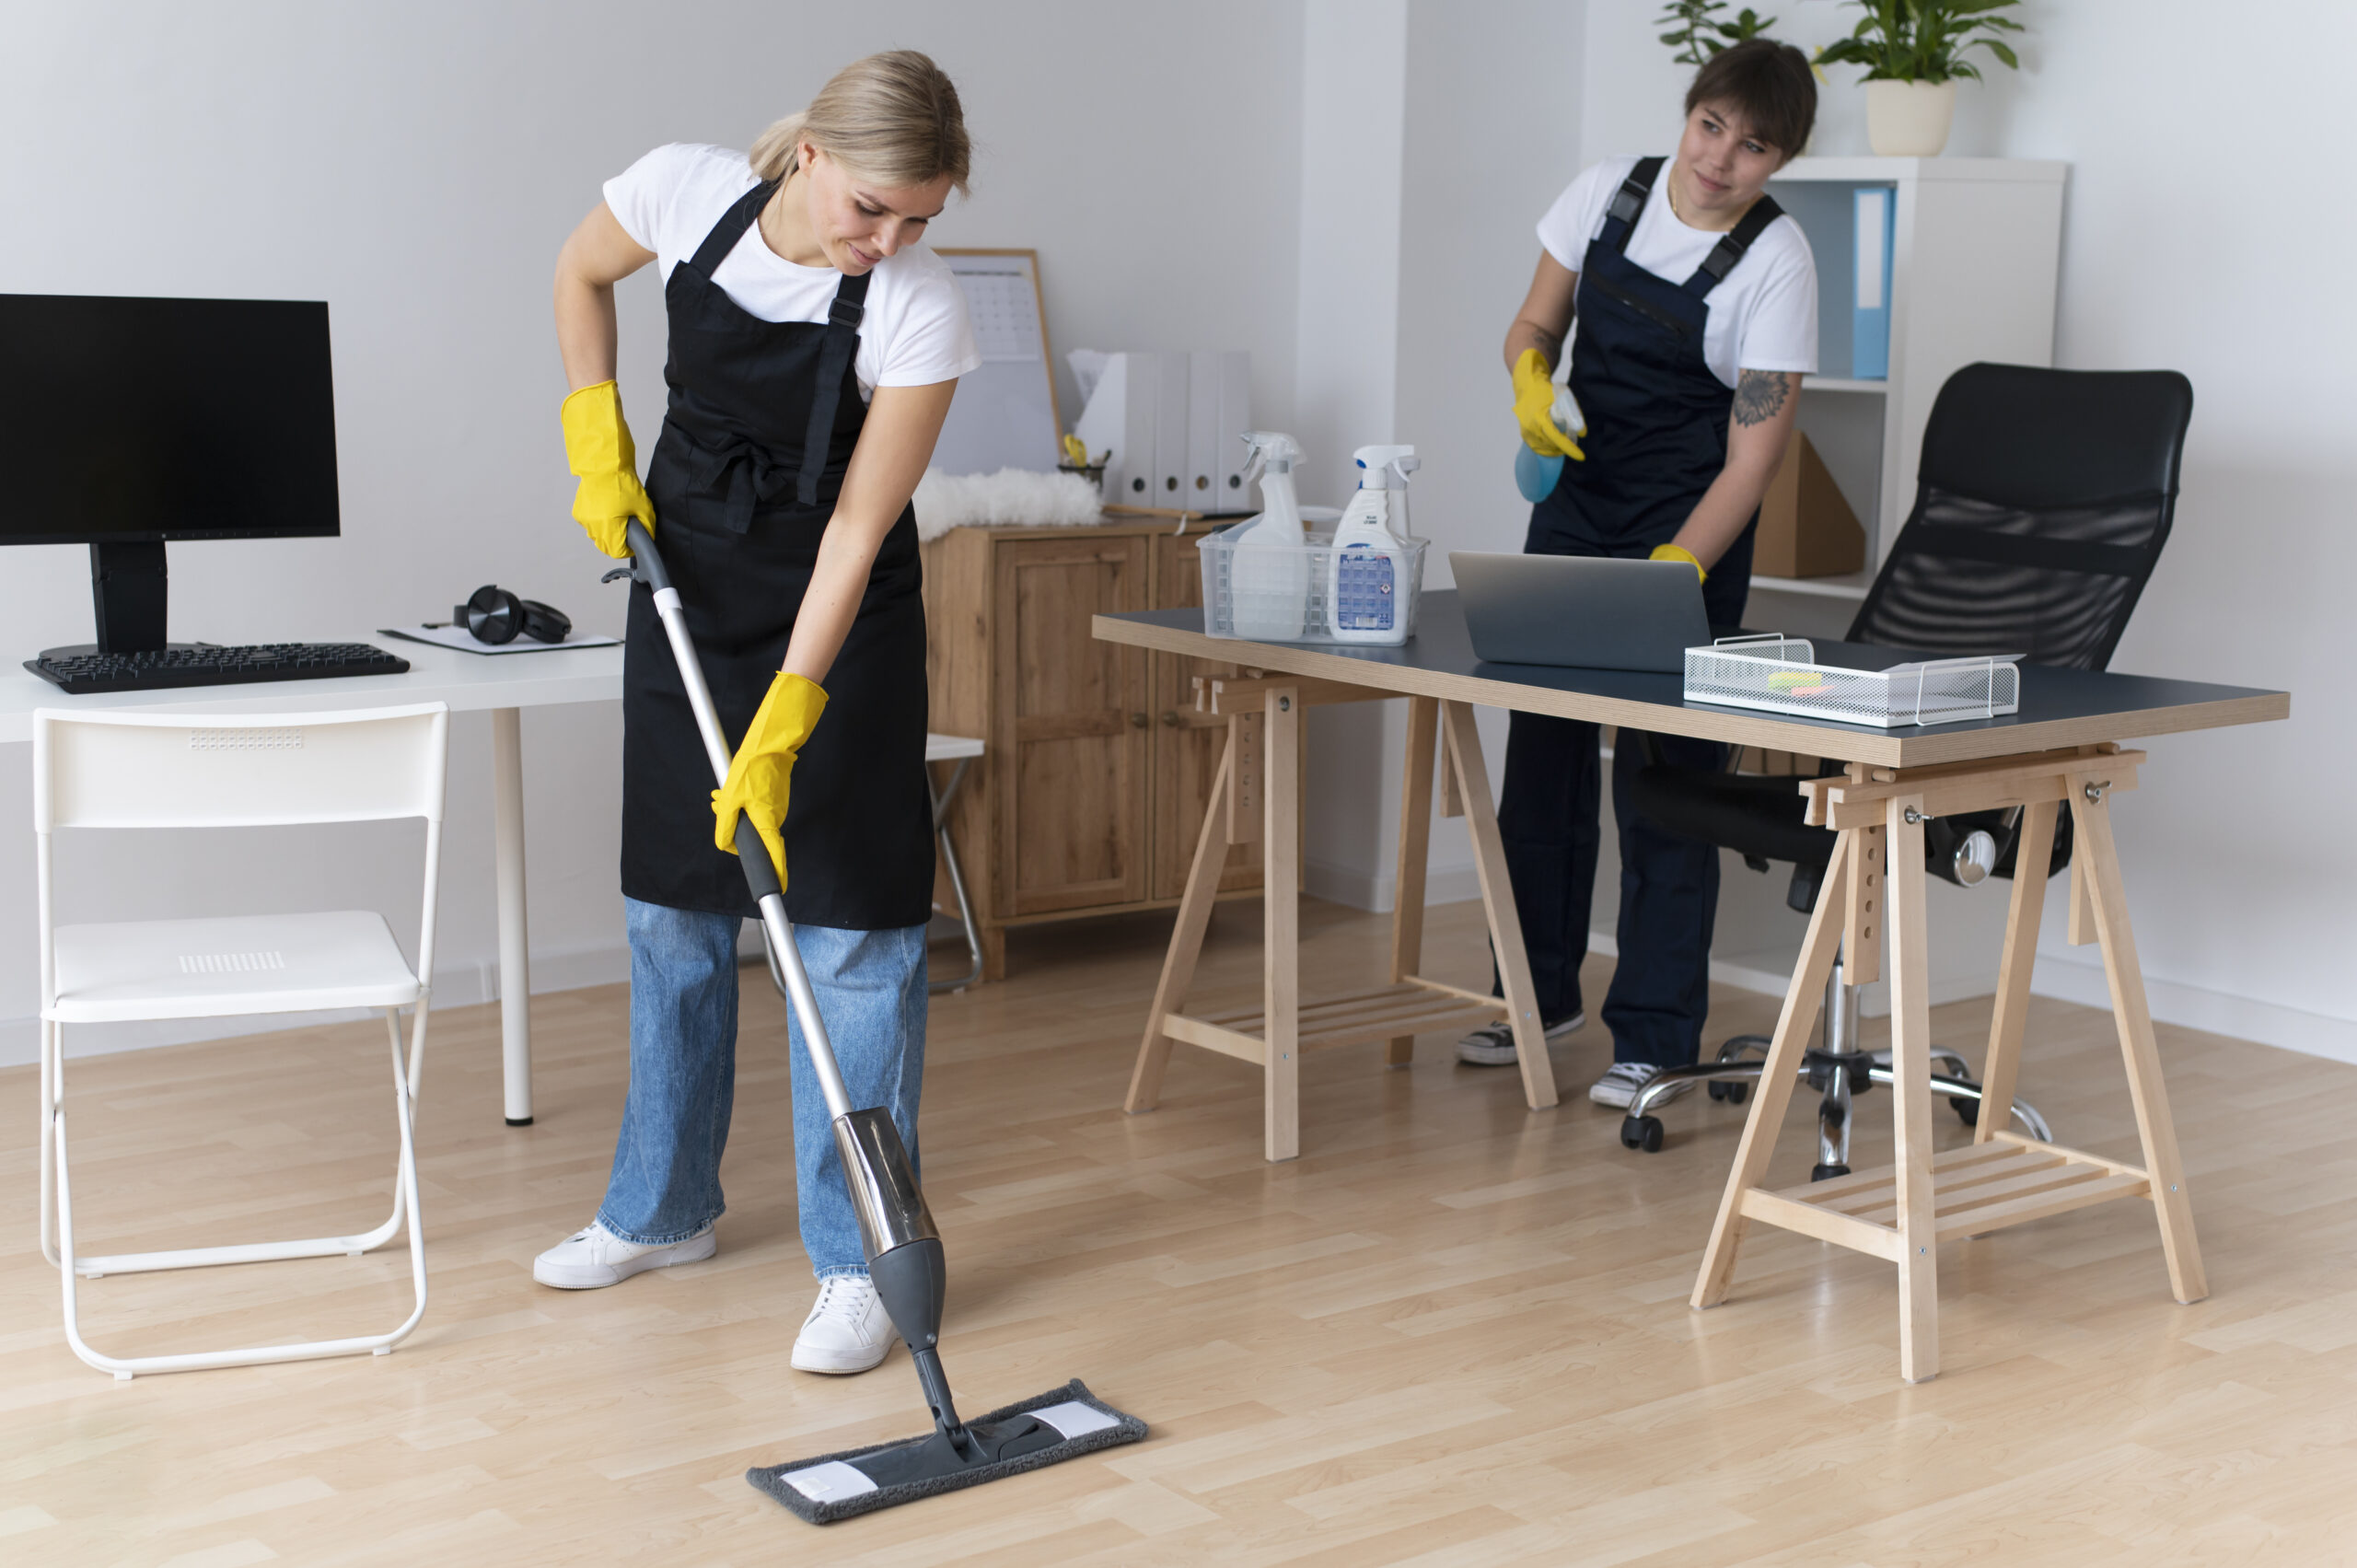 people-taking-care-office-cleaning